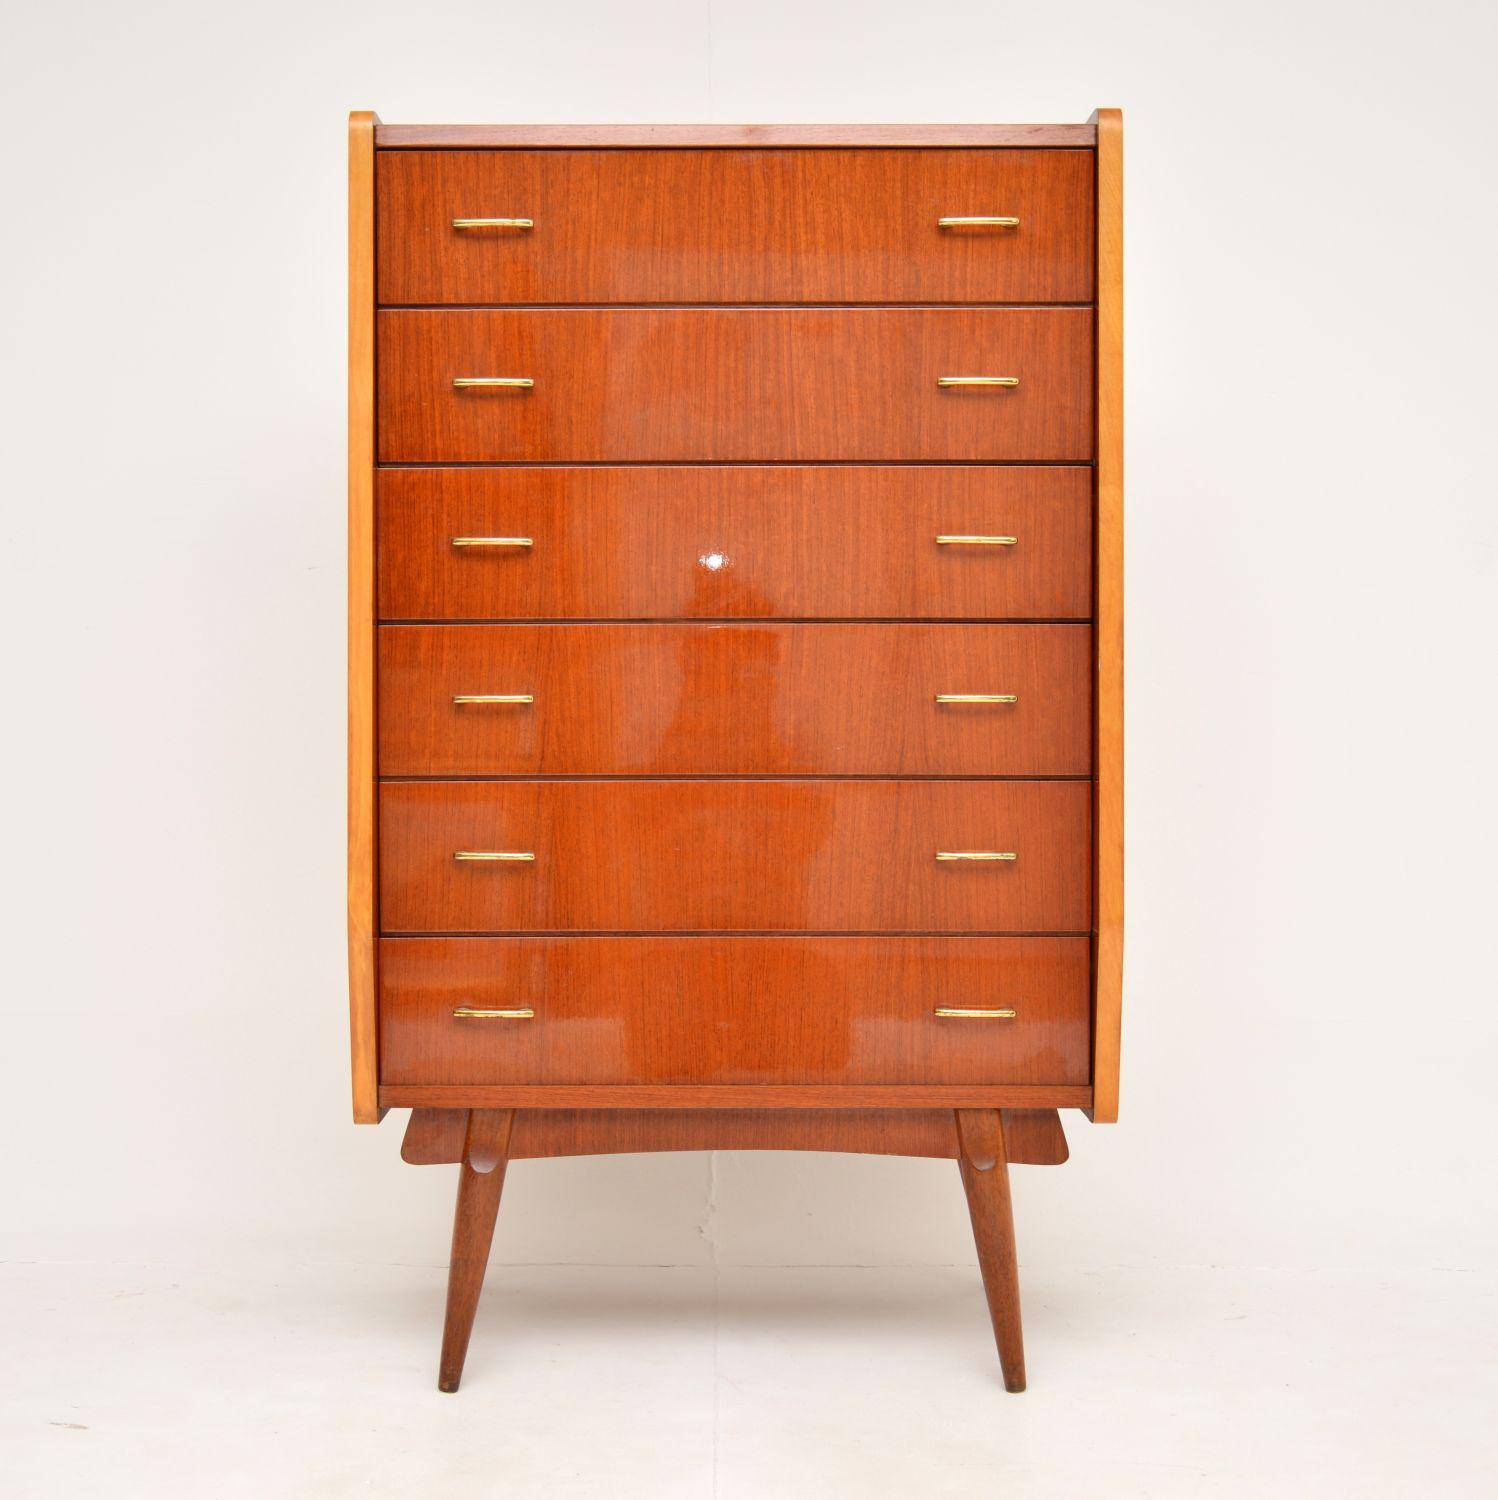 A stylish and extremely well made vintage Italian chest of drawers in walnut. This was made in Italy, it dates from the 1960’s.

The quality is amazing, this is extremely well built and has a beautiful angular design. It sits on slender yet sturdy